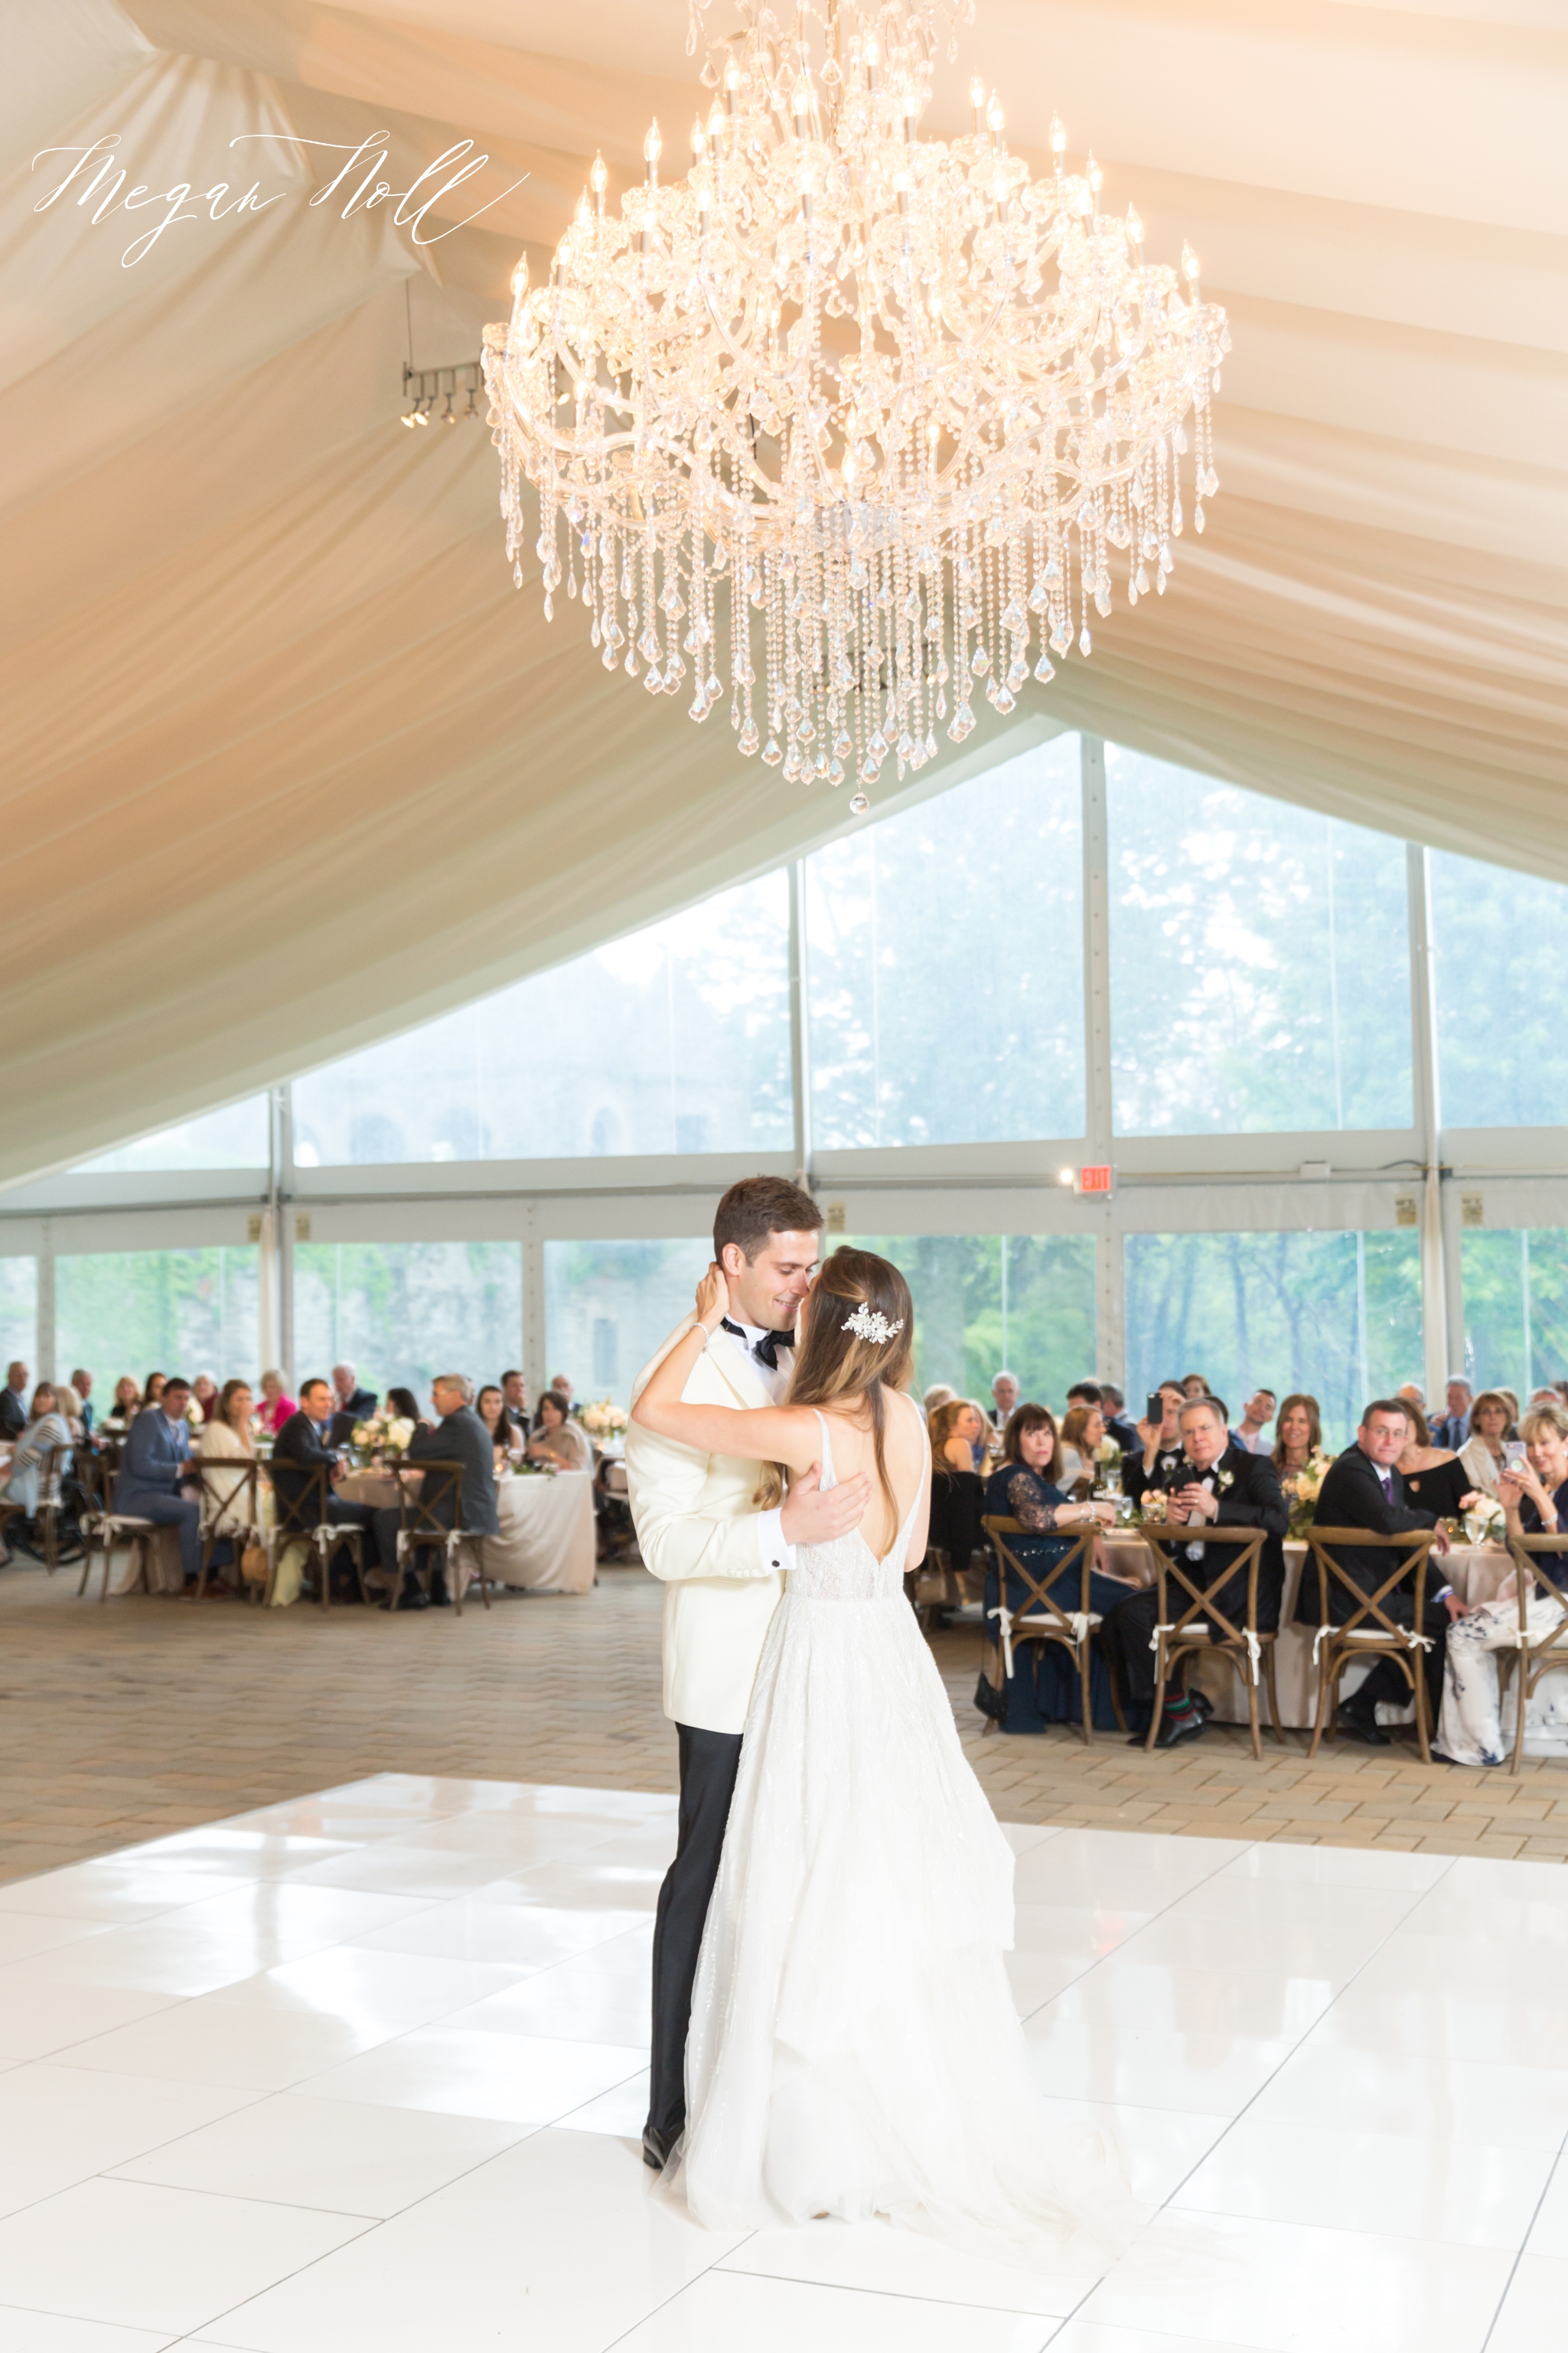 First Dance for Bride and Groom at Greenacres Wedding Reception